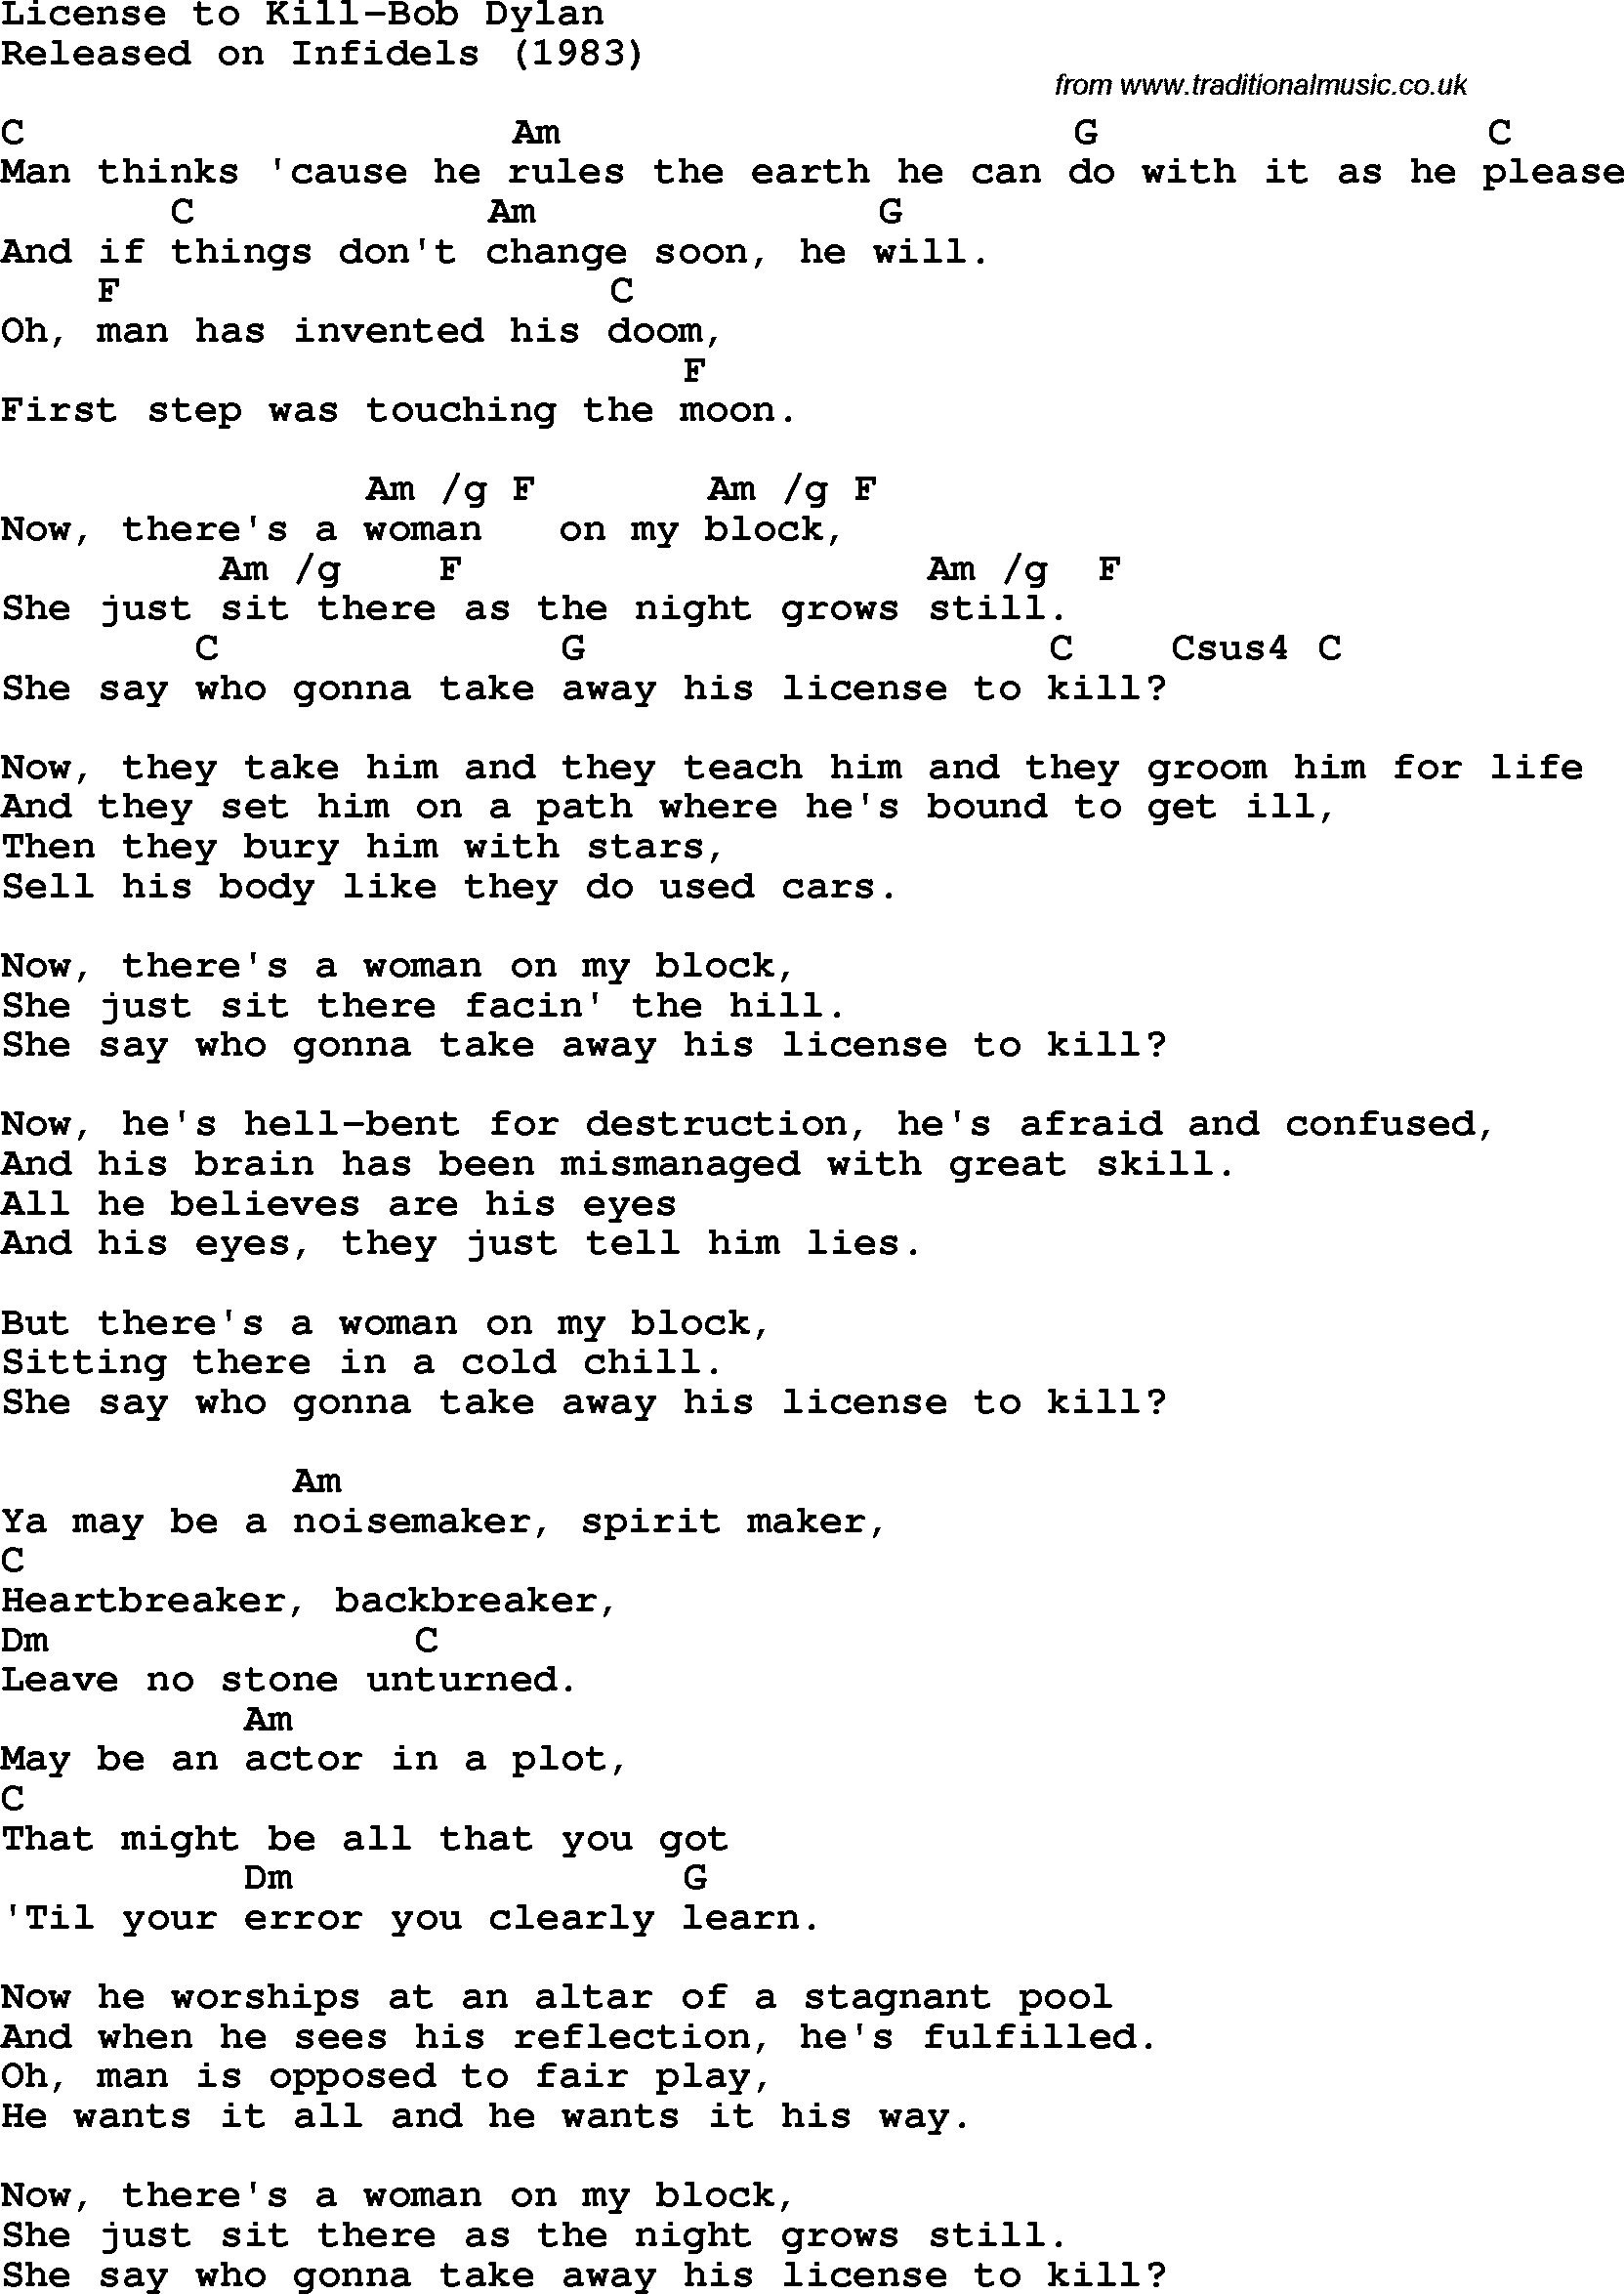 Protest Song License To Kill-Bob Dylan lyrics and chords